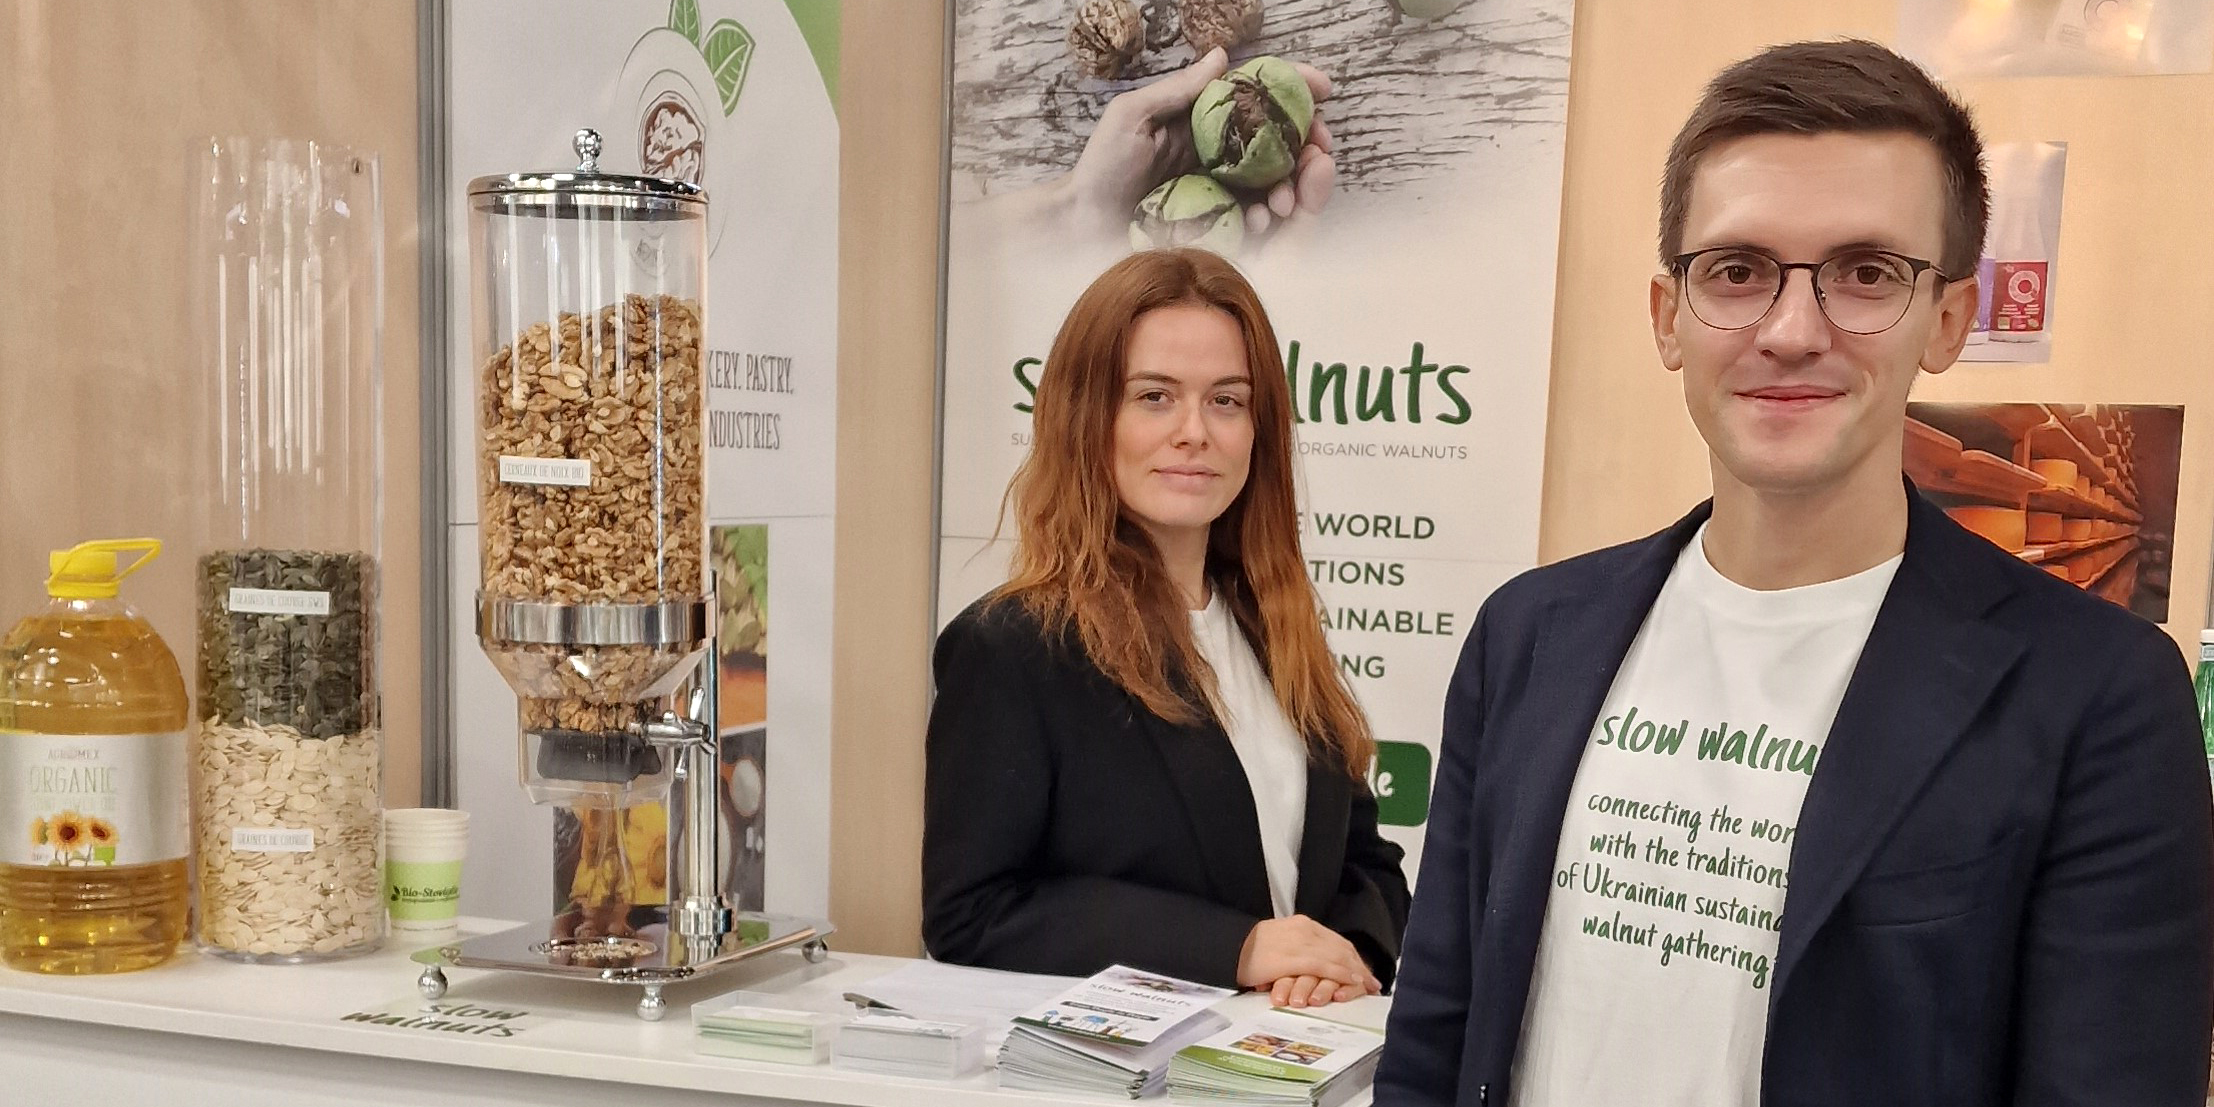 Man and woman standing at an exhibition stand with walnuts